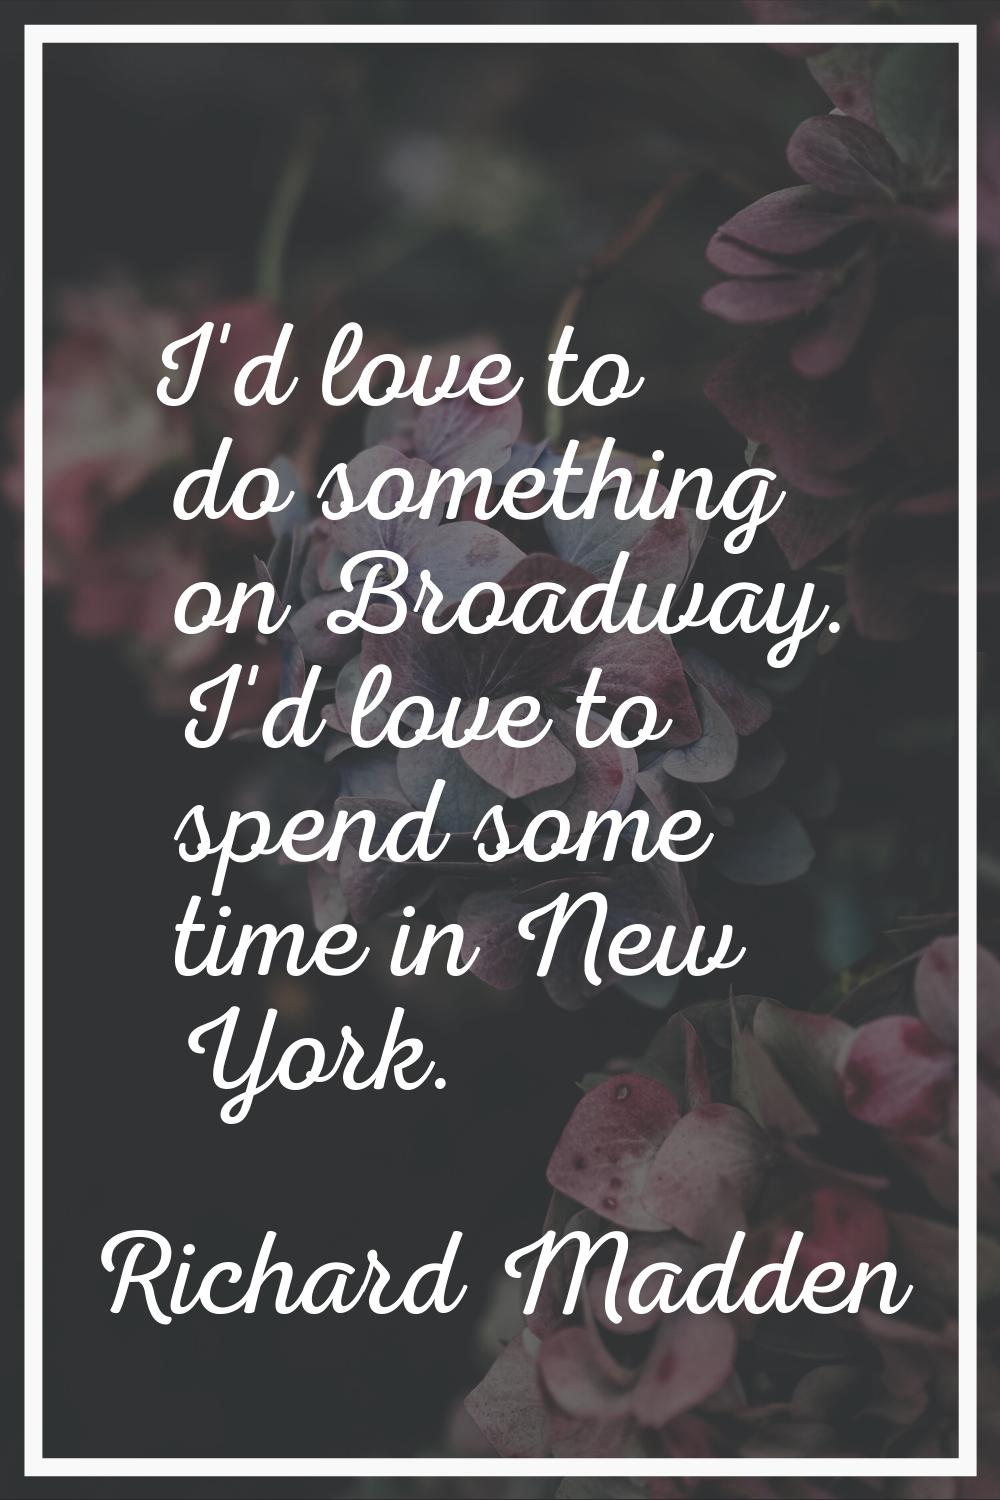 I'd love to do something on Broadway. I'd love to spend some time in New York.